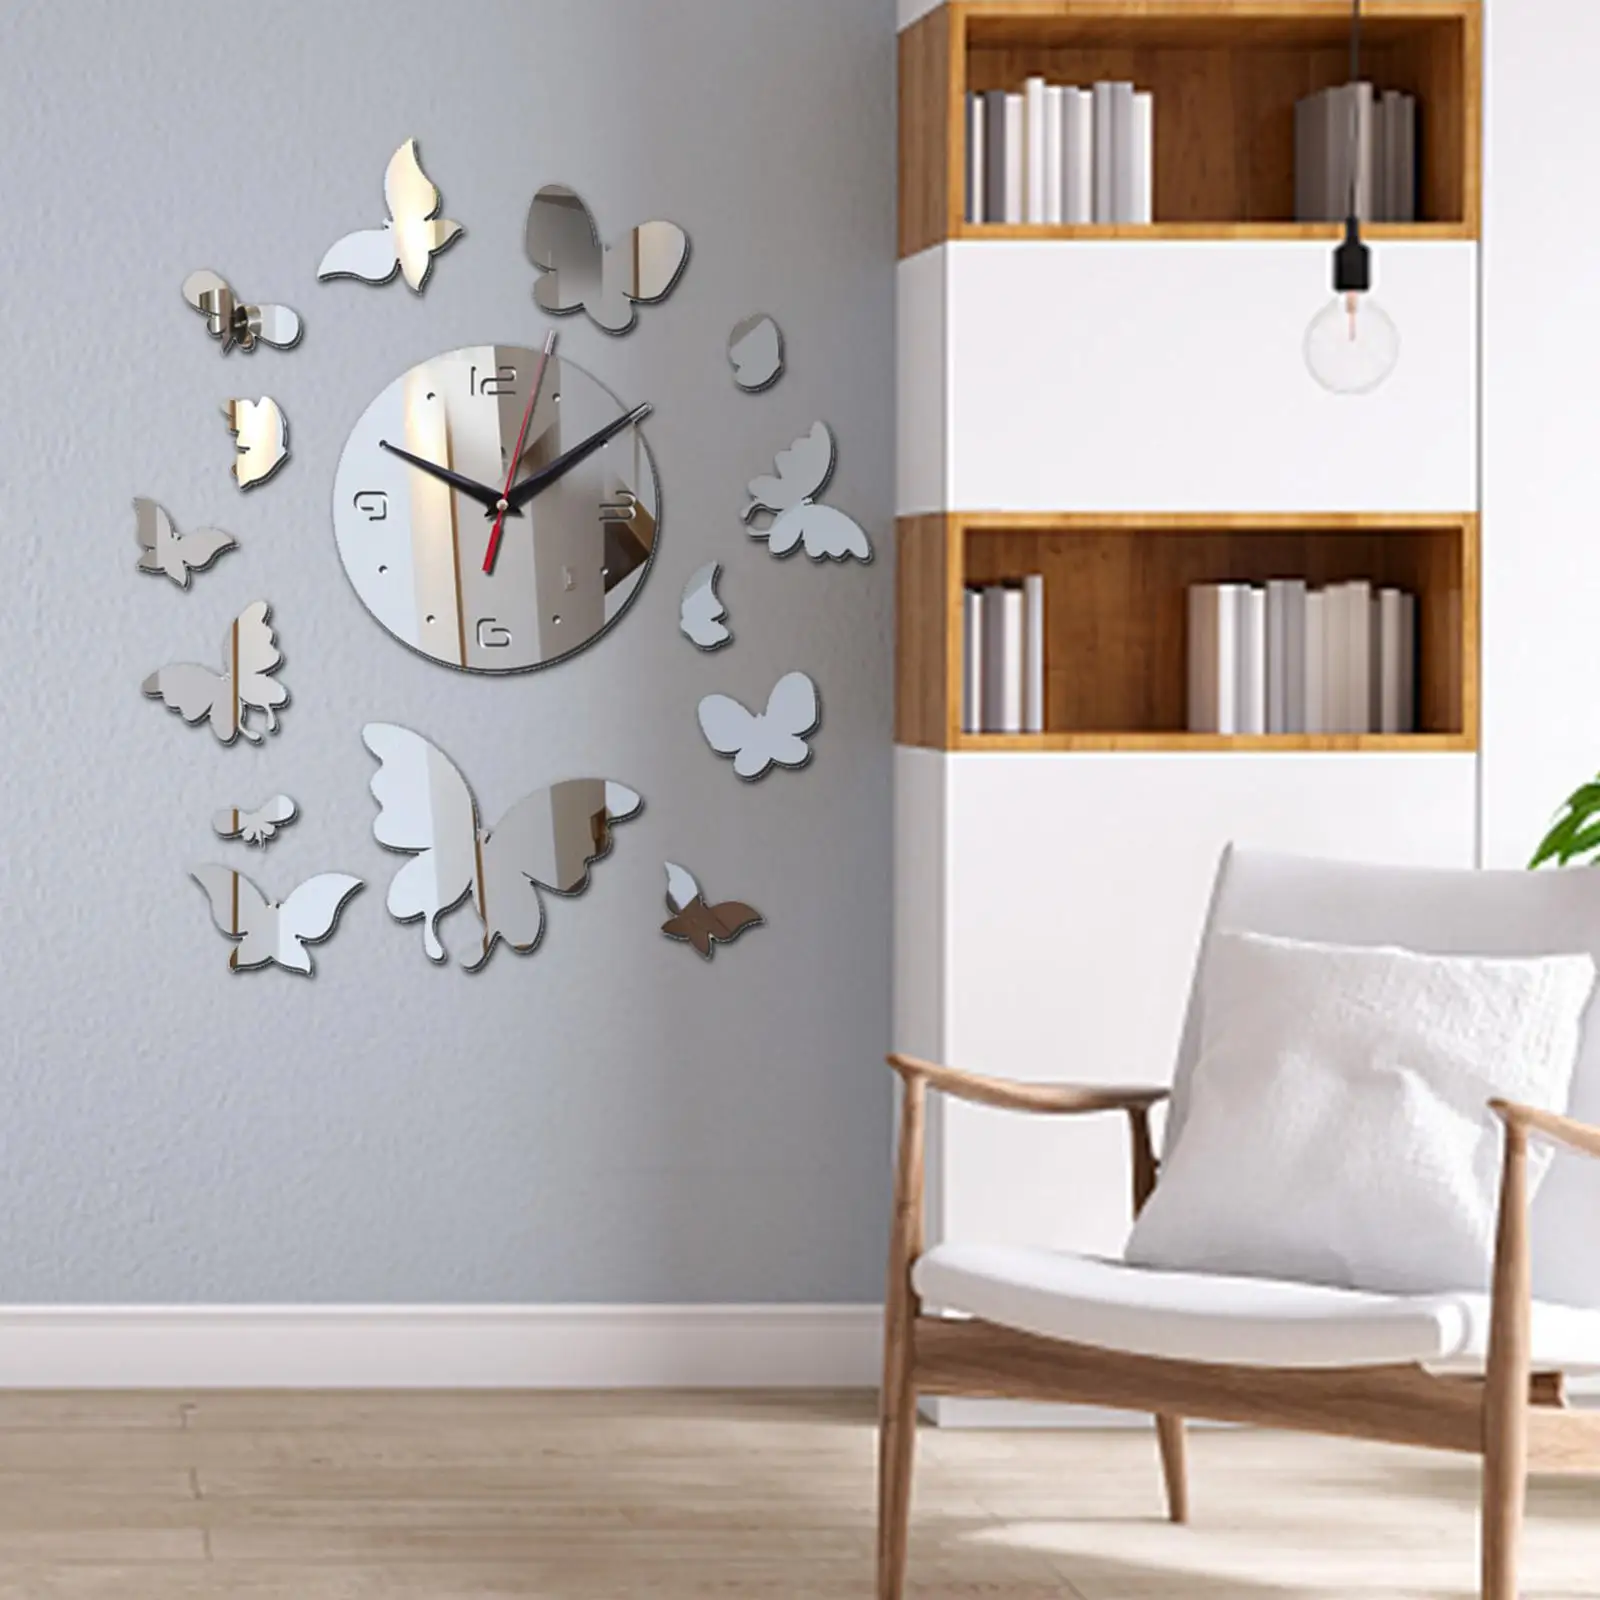 Modern Wall Clock Art Decal Acrylic Mute for Living Room Home Decoration